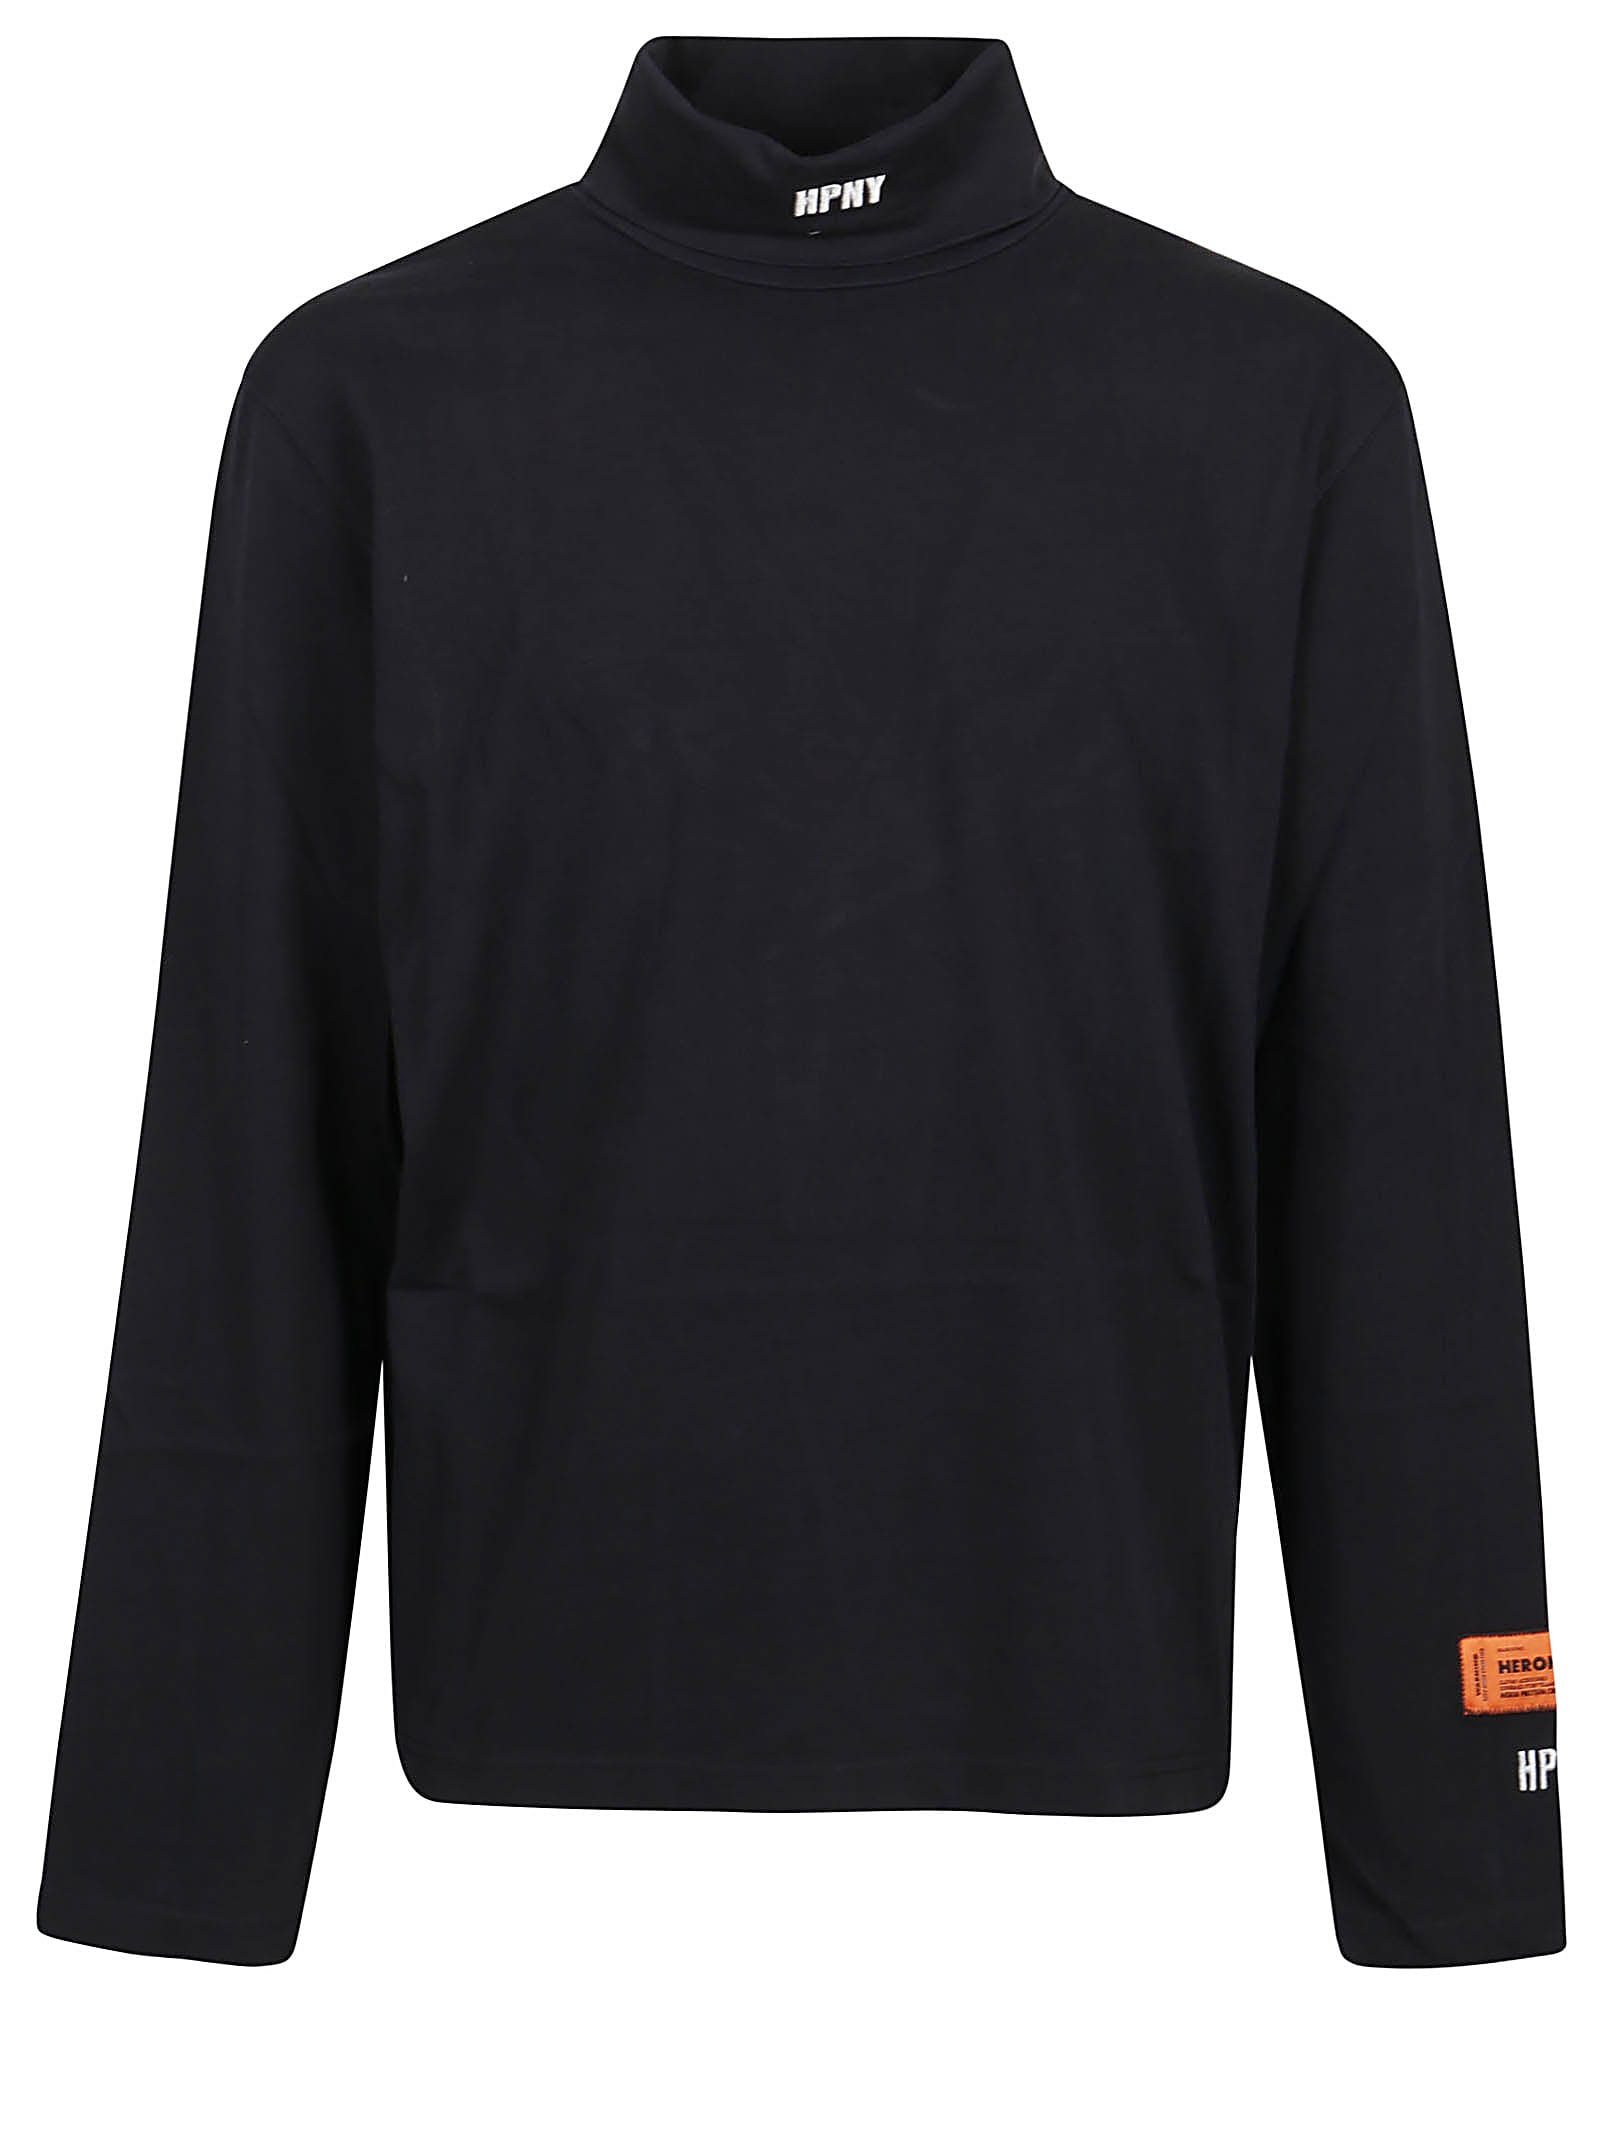 Shop Heron Preston Hpny Embroidery Roll Neck Long Sleeve T-shirt In Black White